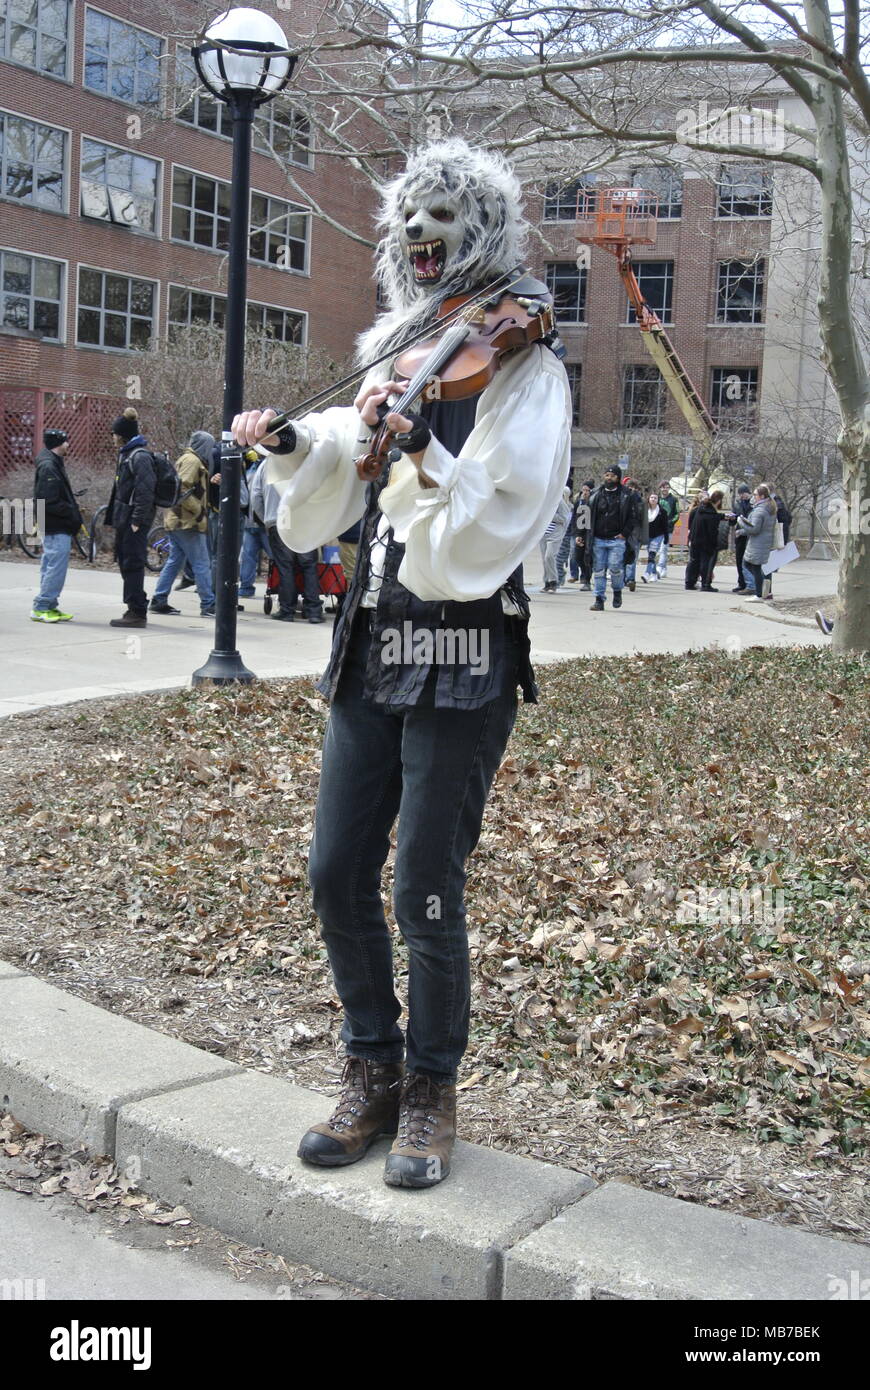 Ann Arbor, Michigan, USA.  7 April 2018.  Street performer at the 47th annual Hash Bash event.  Credit, Jeffrey Wickett/Alamy Live News. Stock Photo